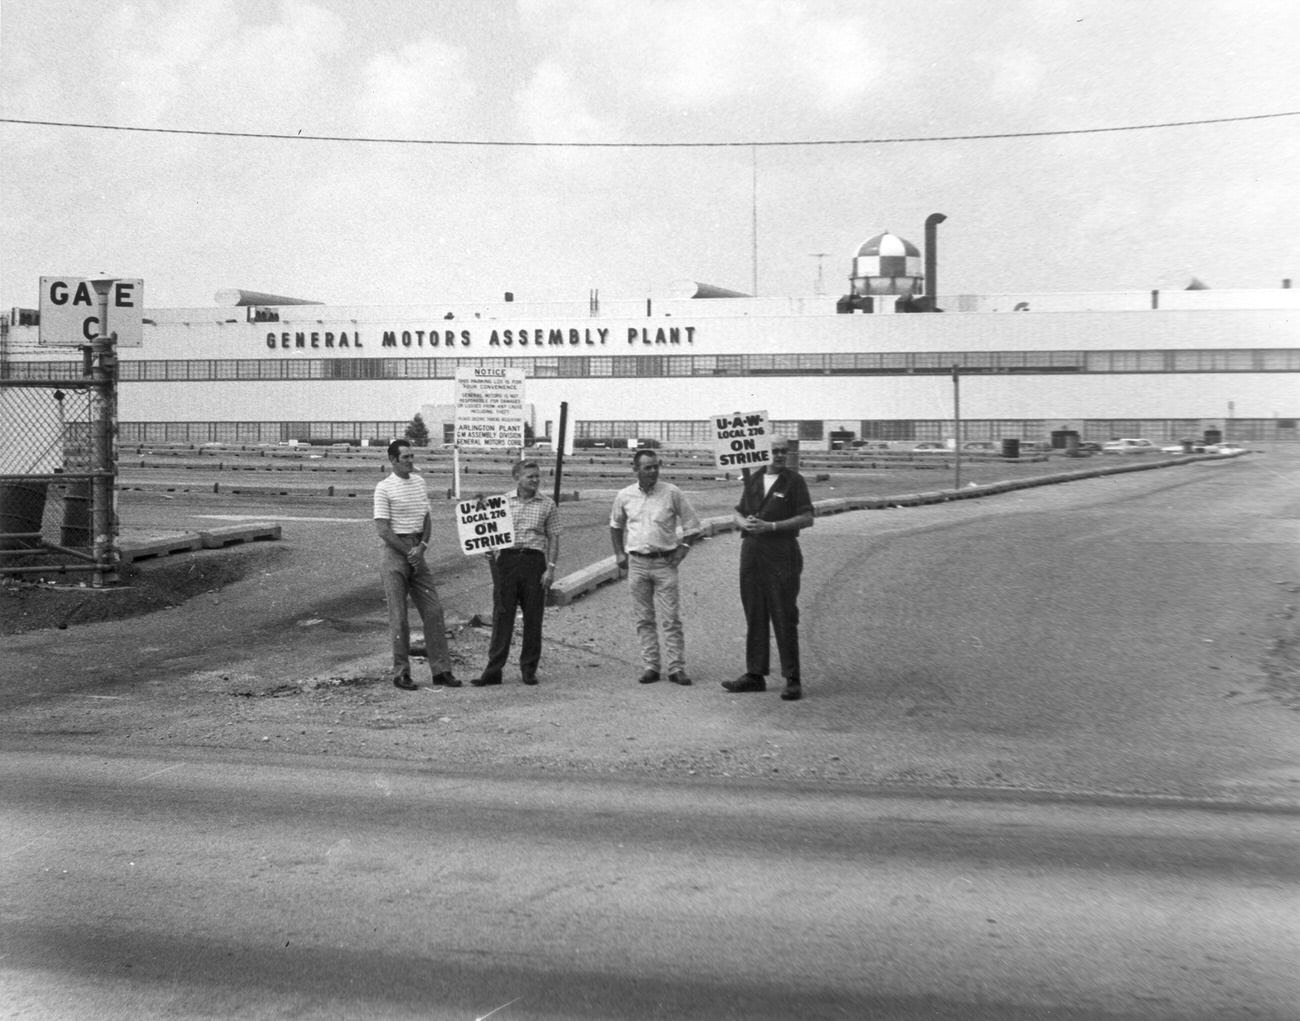 Four men from United Auto Workers (U. A. W.) Local 276 on strike in front of General Motors Assembly Plant, 1970